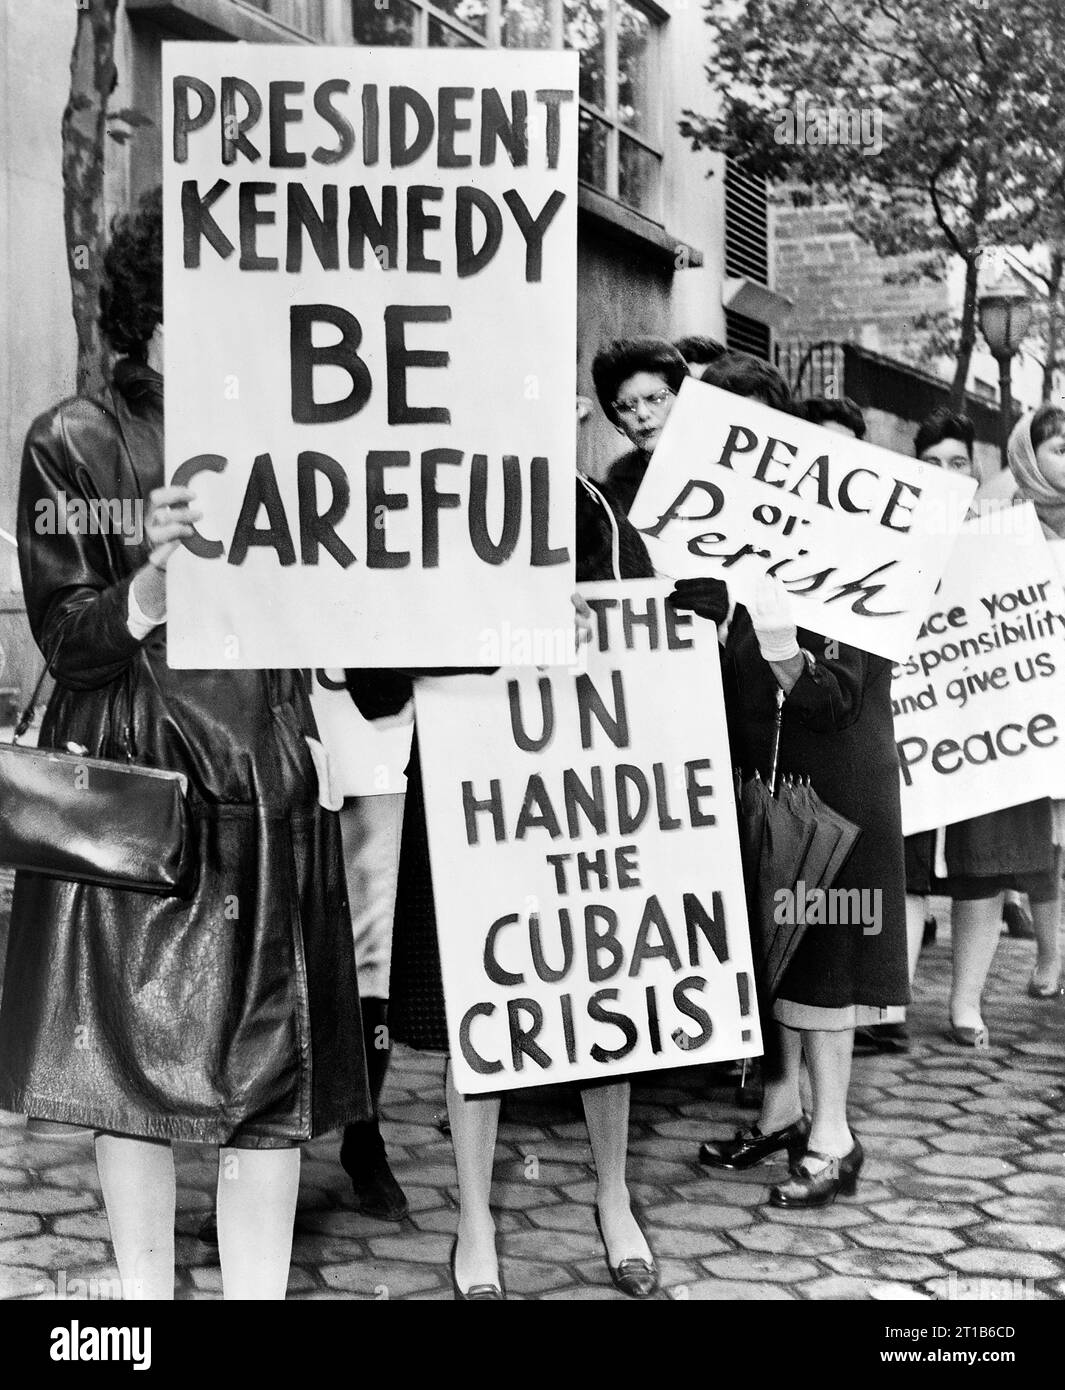 Group of women from Women Strike for Peace holding signs relating to Cuban missile crisis and peace, New York City, New York, USA, Phil Stanziola, New York World-Telegram and the Sun Newspaper Photograph Collection, 1962 Stock Photo